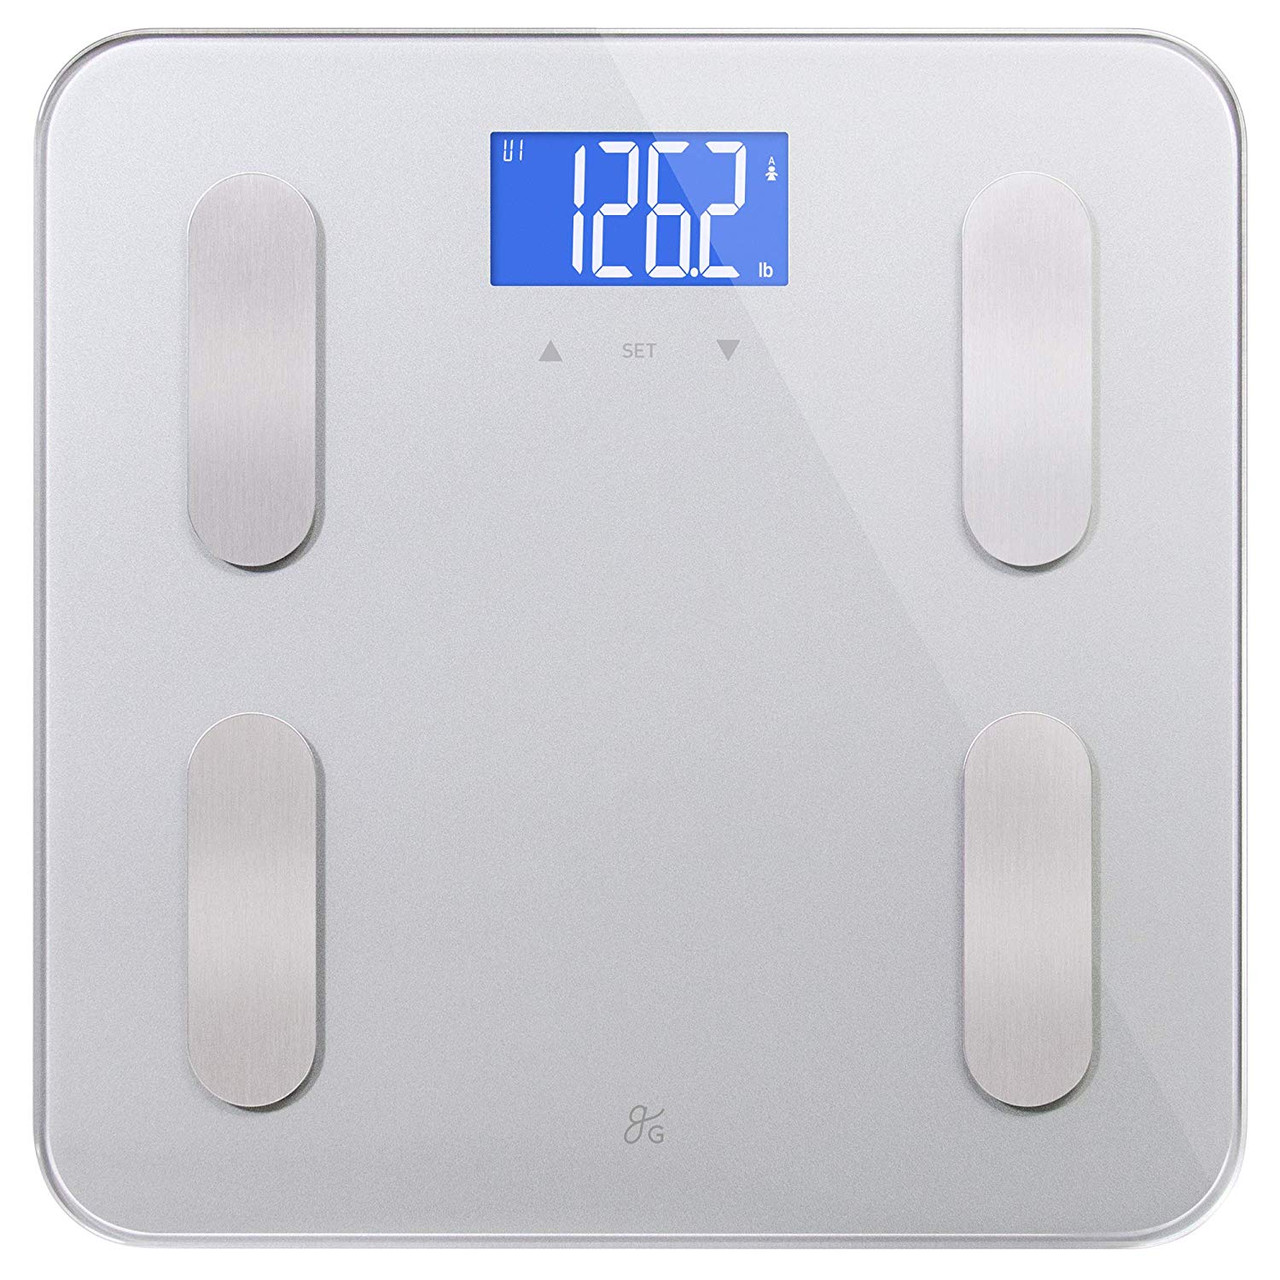 Body Composition Scale with Body Fat, Body Water and BMI